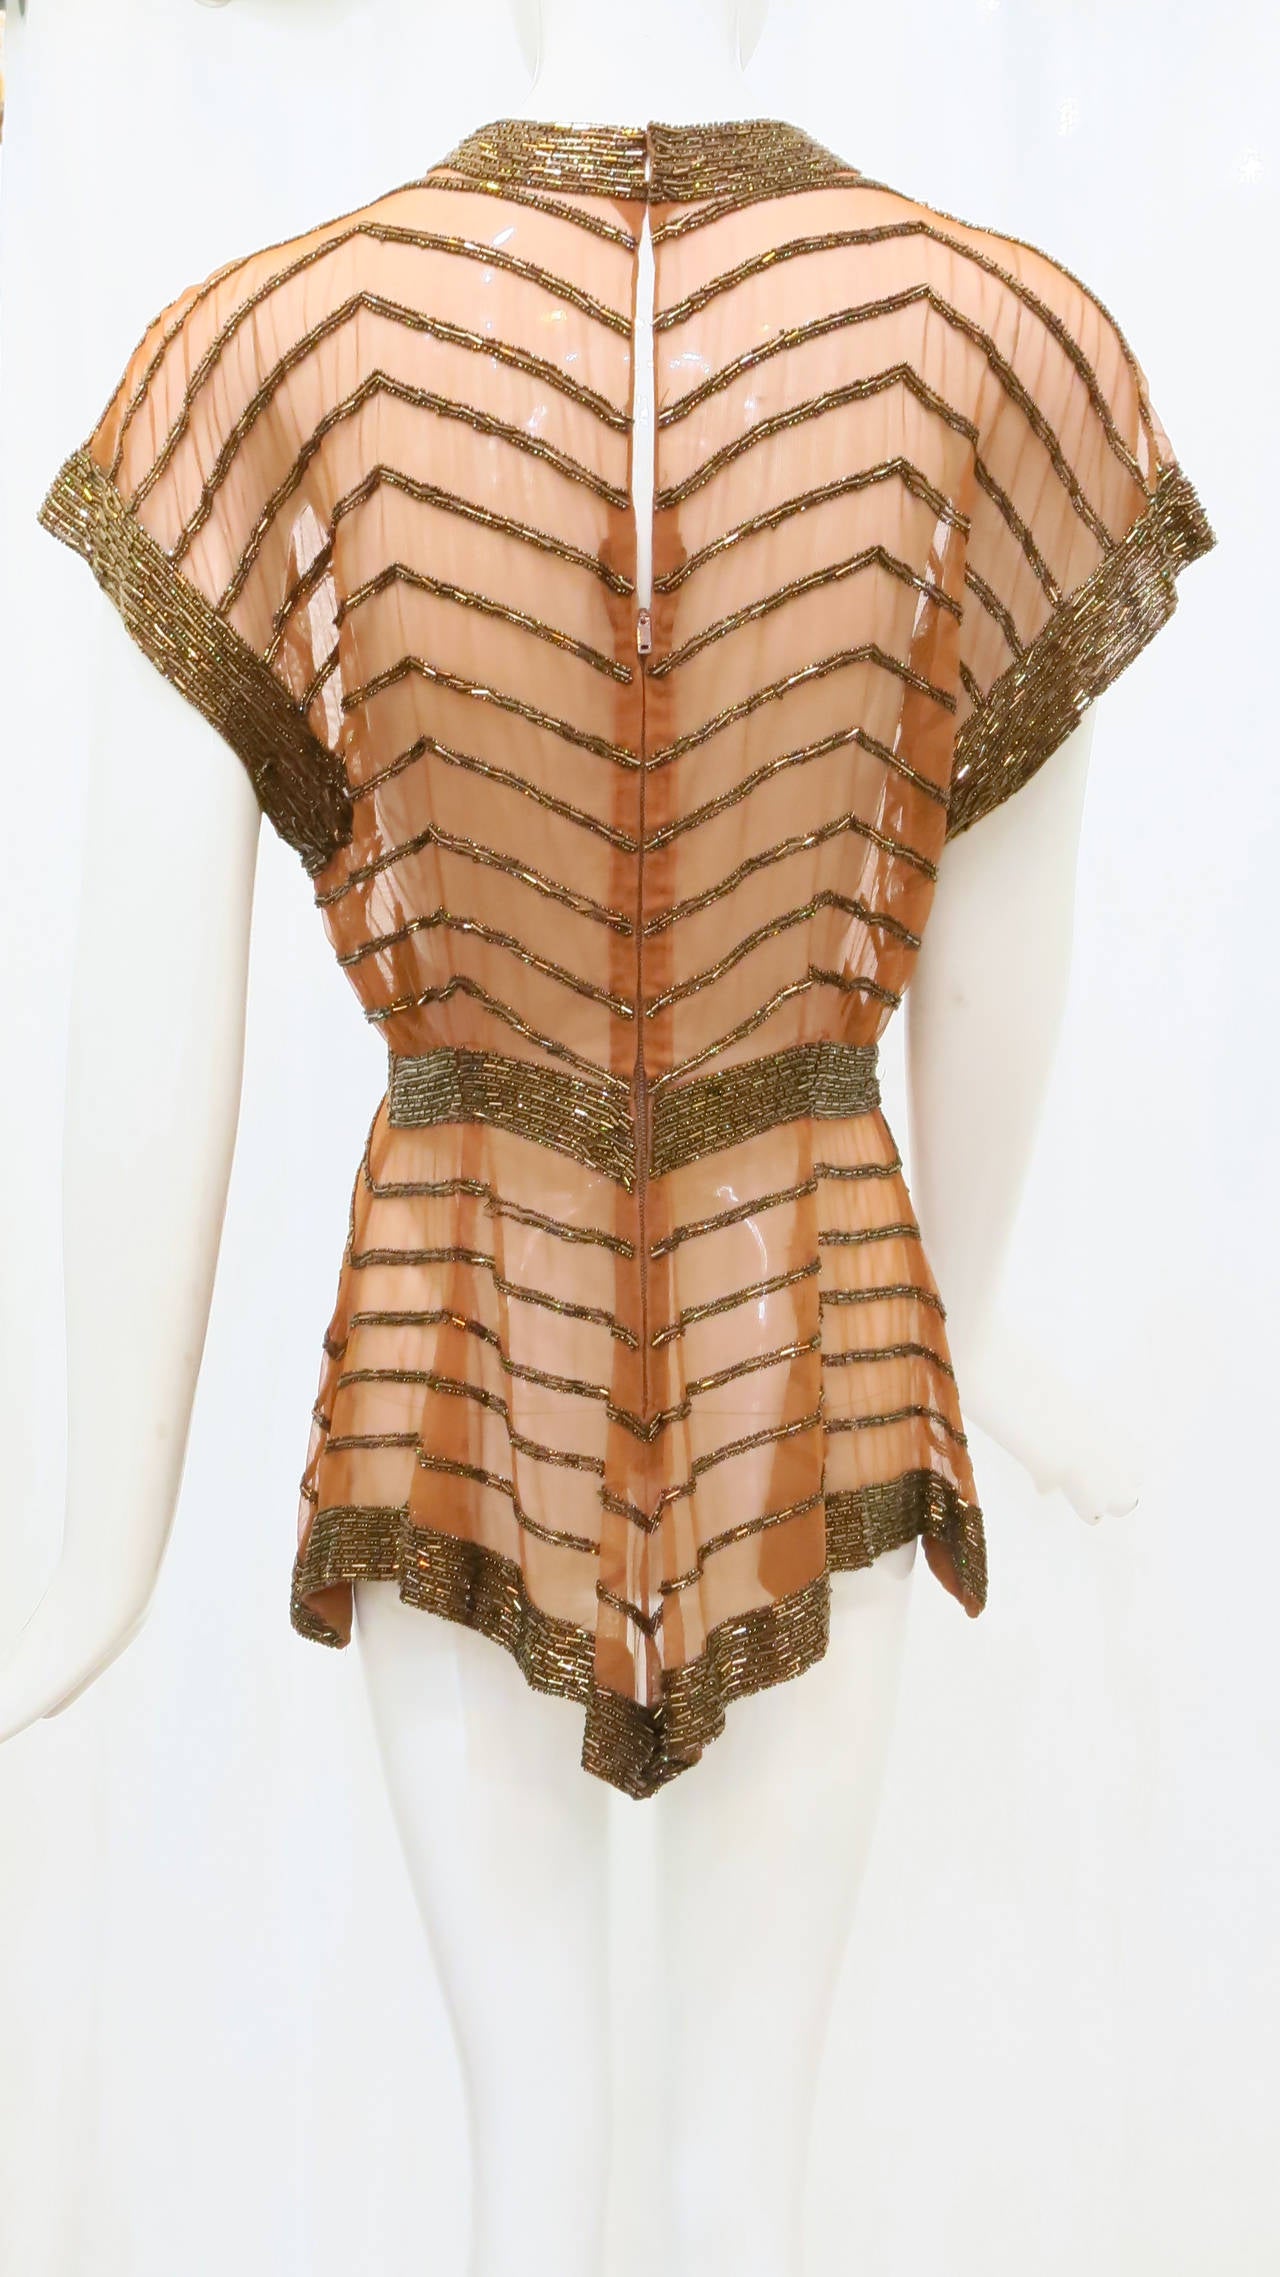 1930s Copper Mesh Beaded Top with Stylized Collar and Chevron Motif 4